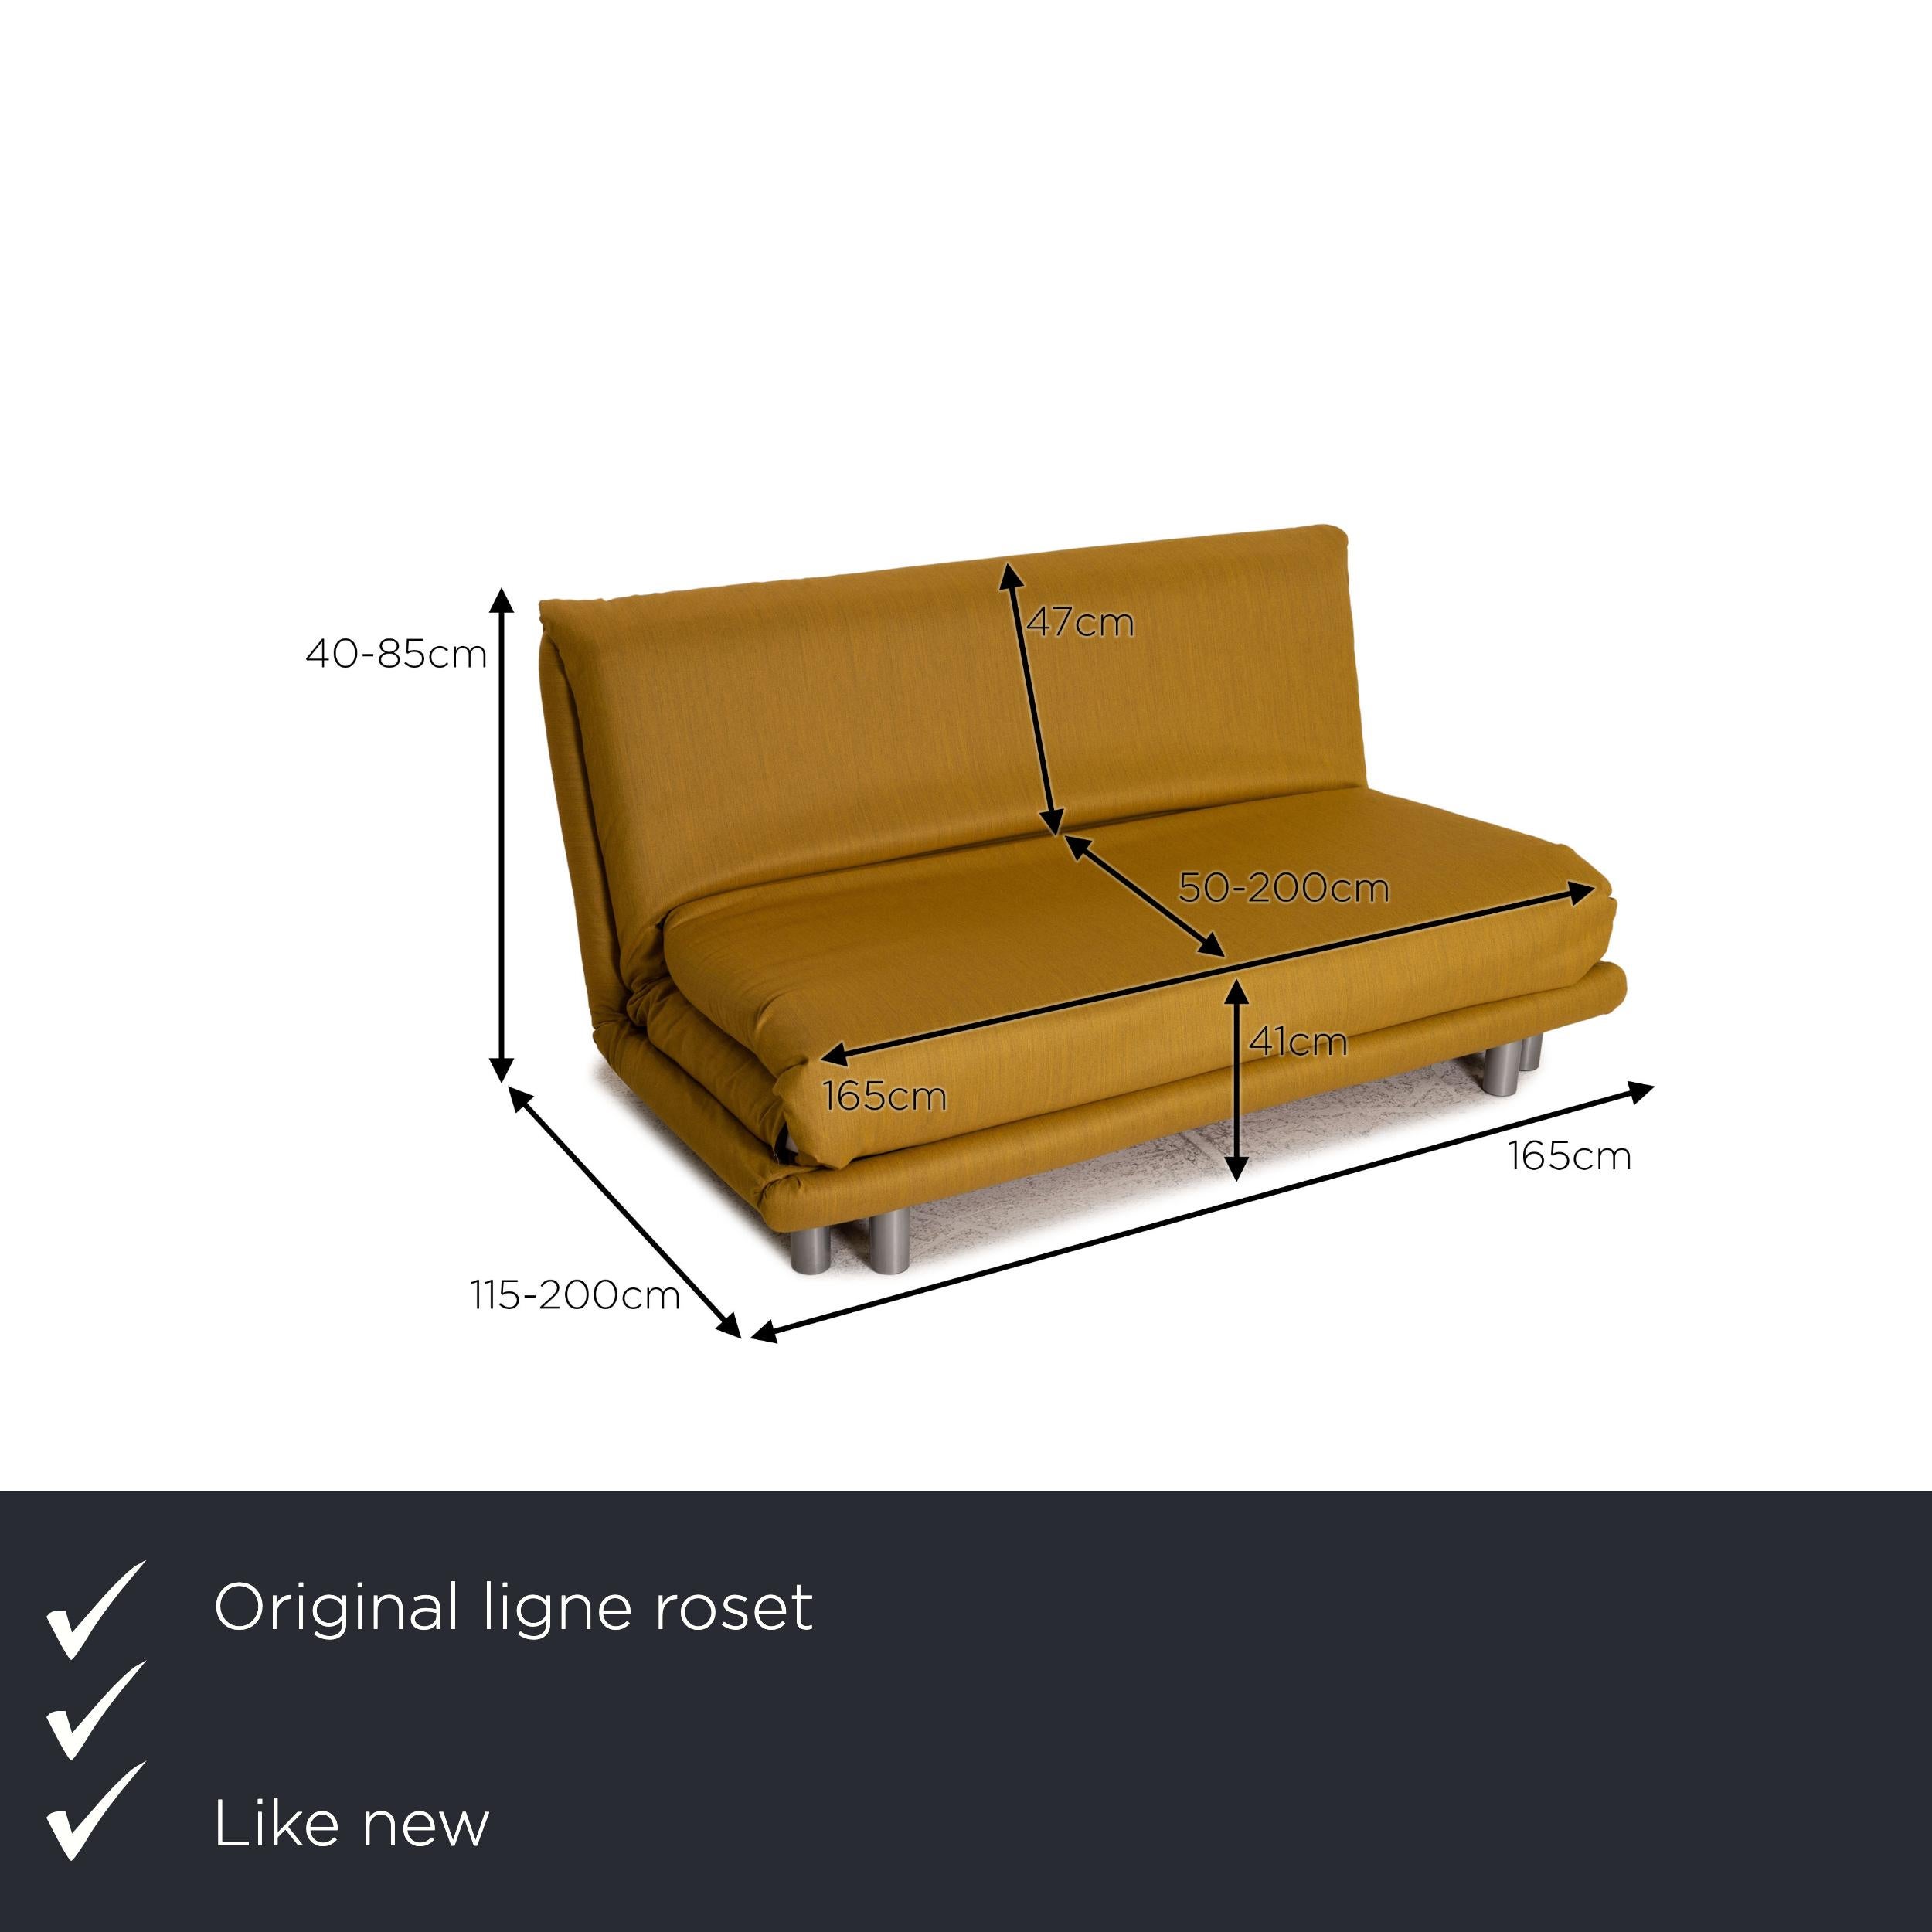 We present to you a Ligne Roset Multy two-seater couch sofa bed function new cover.

Product measurements in centimeters:

depth: 115
width: 165
height: 40
seat height: 41
seat depth: 50
seat width: 165
back height: 47.


 